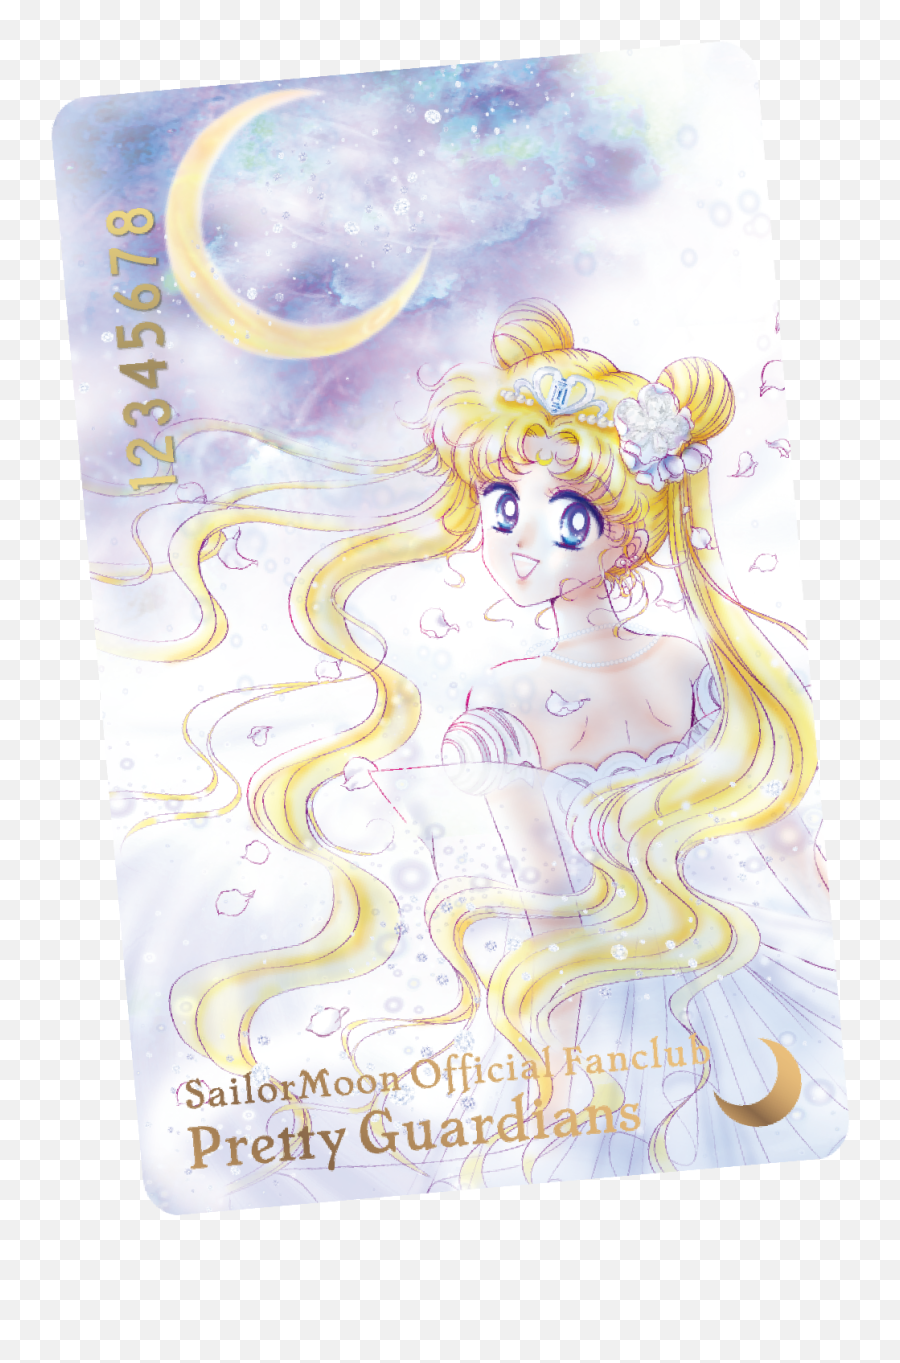 About This Site Pretty Guardians Sailor Moon Official Fan Emoji,Sailor Moon Characters Text Emoticon